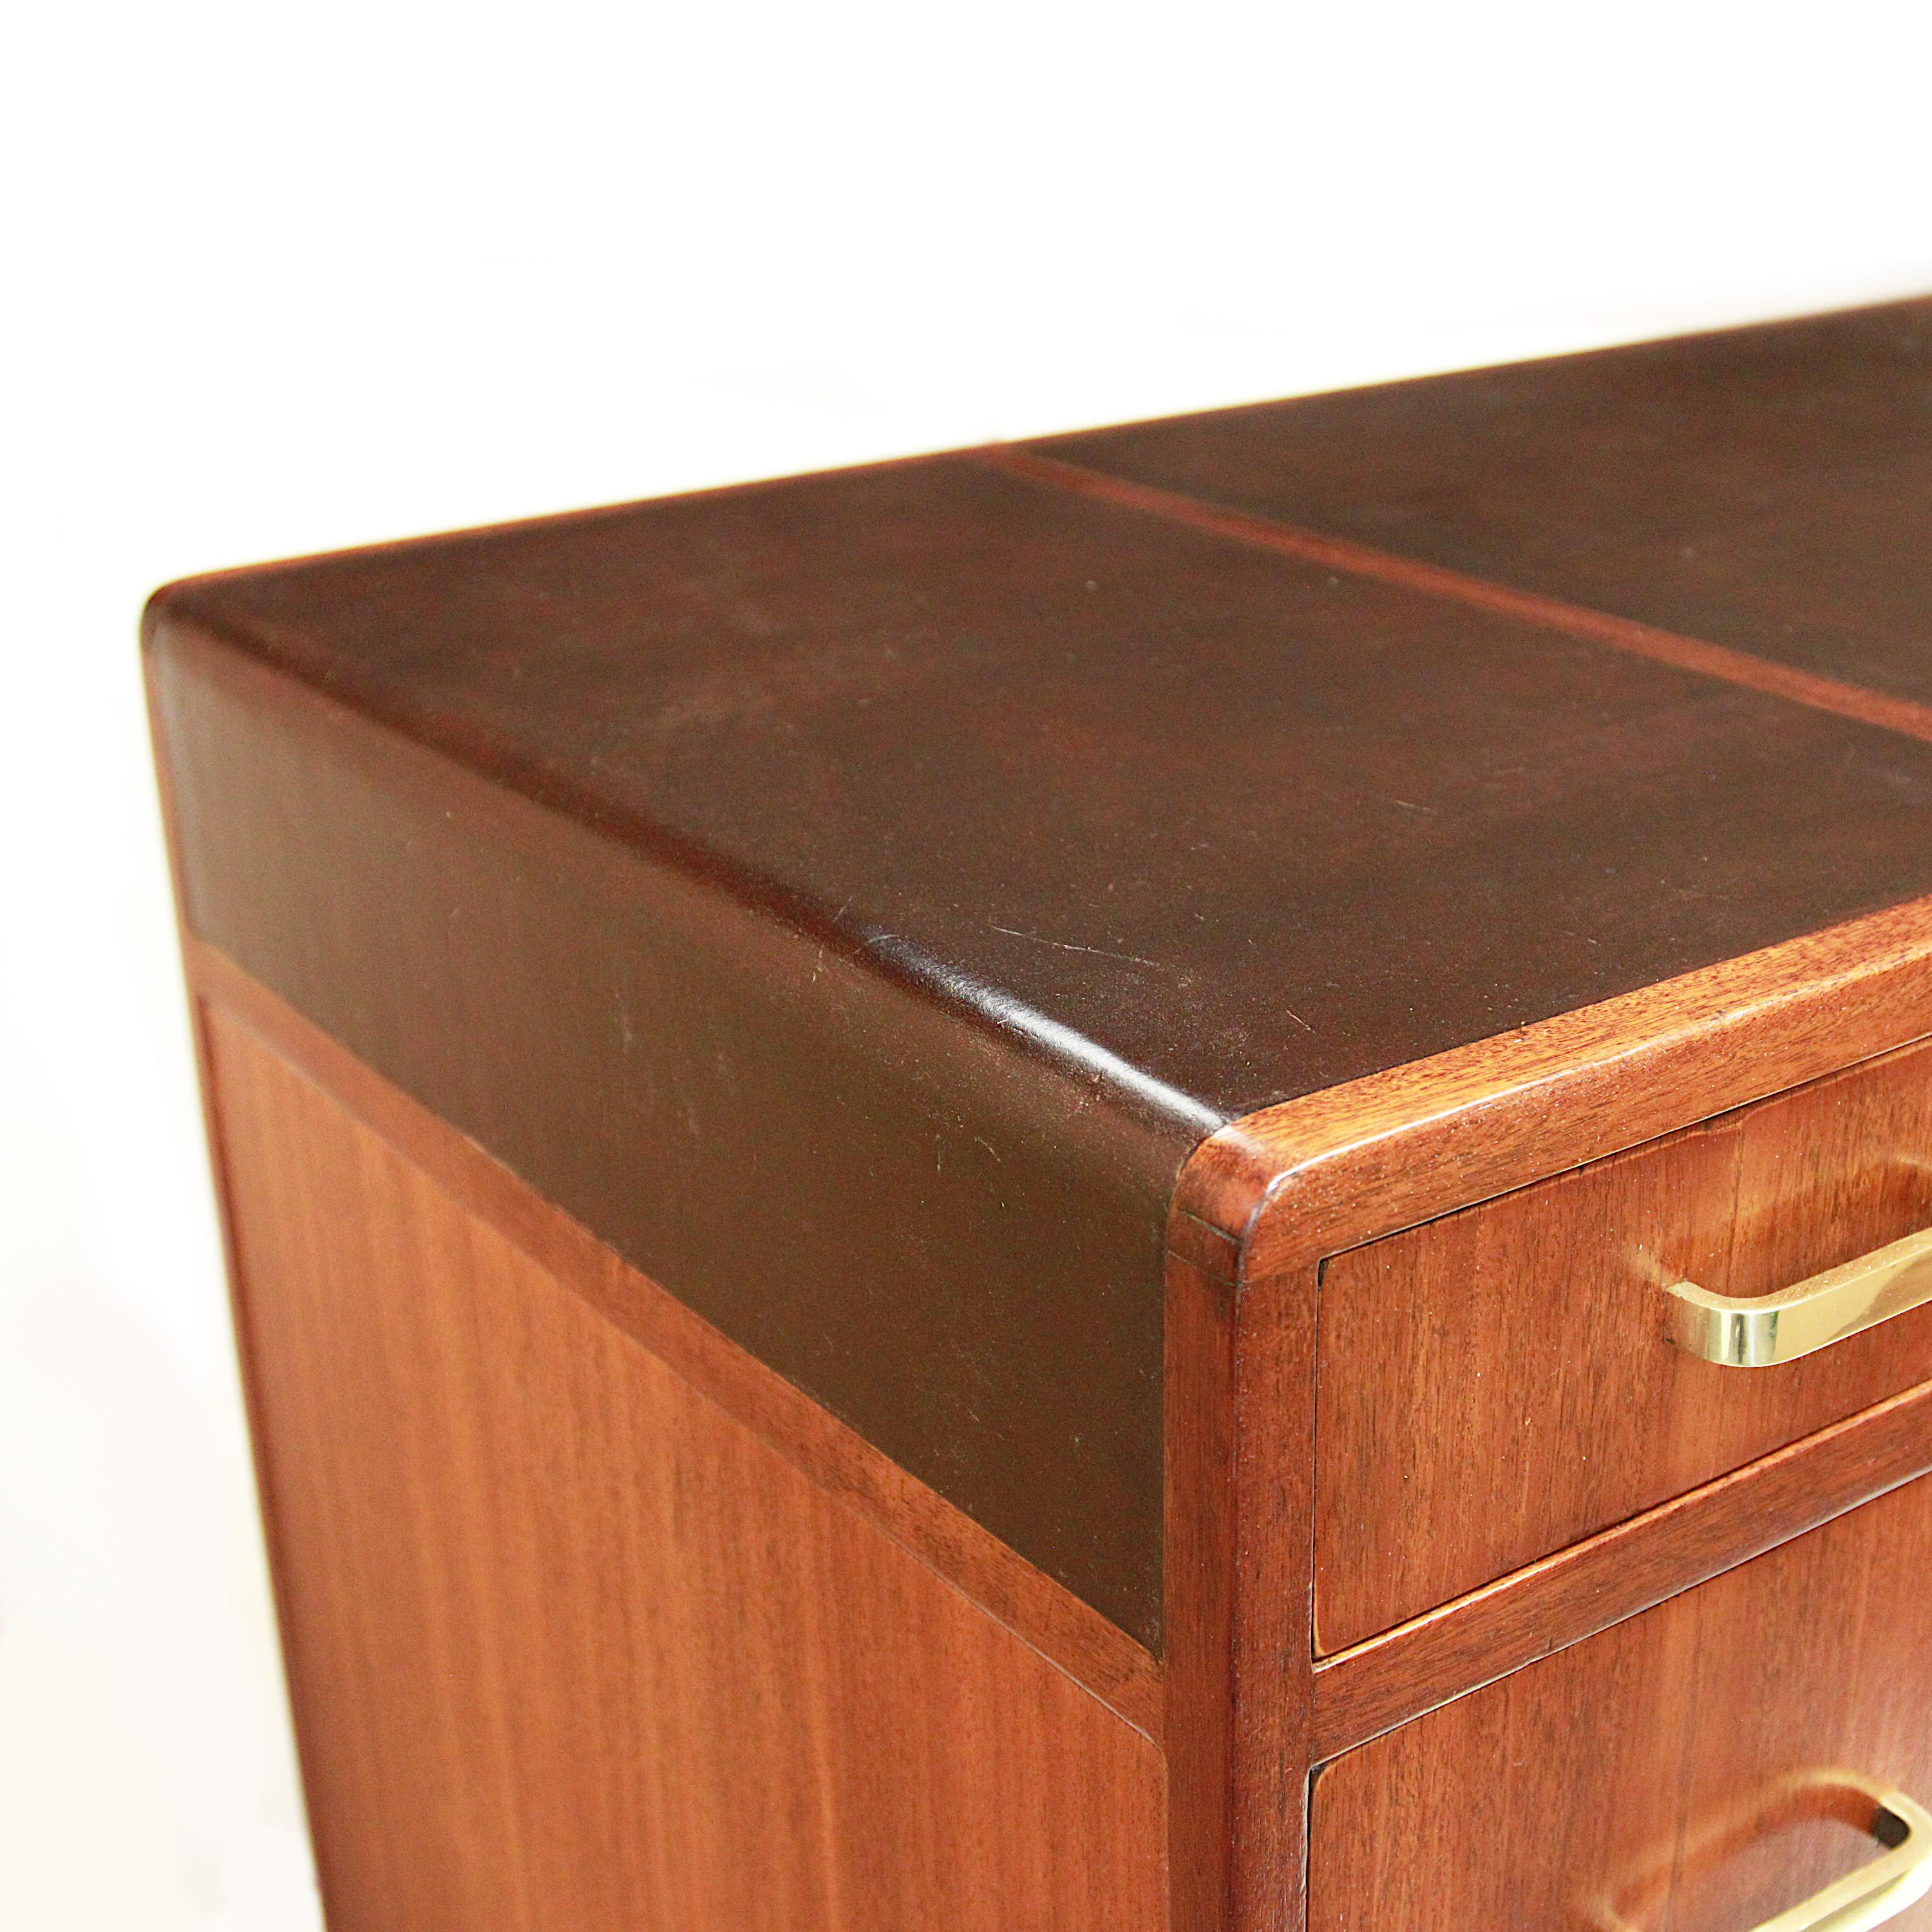 Mid-20th Century Mid-Century Modern Kneehole Leather-Top Desk by Edward Wormley for Dunbar